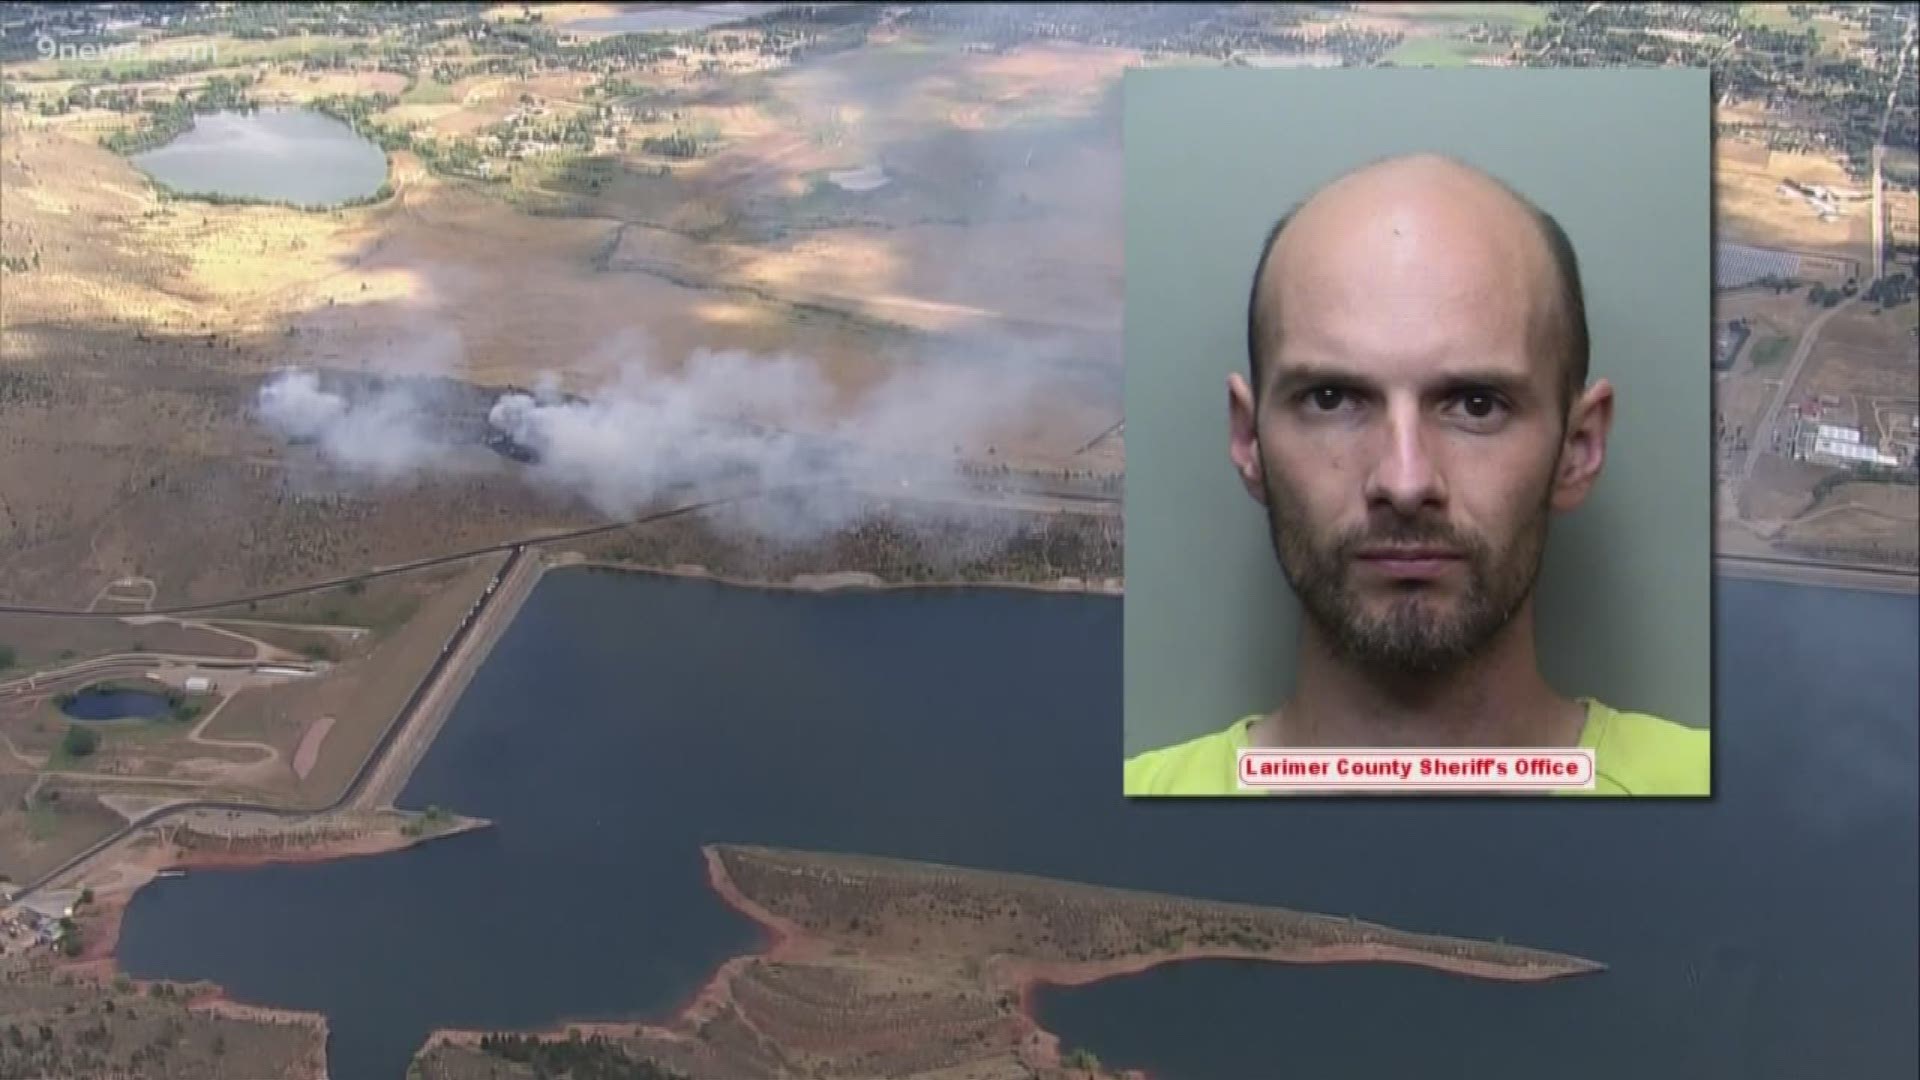 The fire burned 16.2 acres and cost more than $5,000 in resources to extinguish, according to arrest documents.